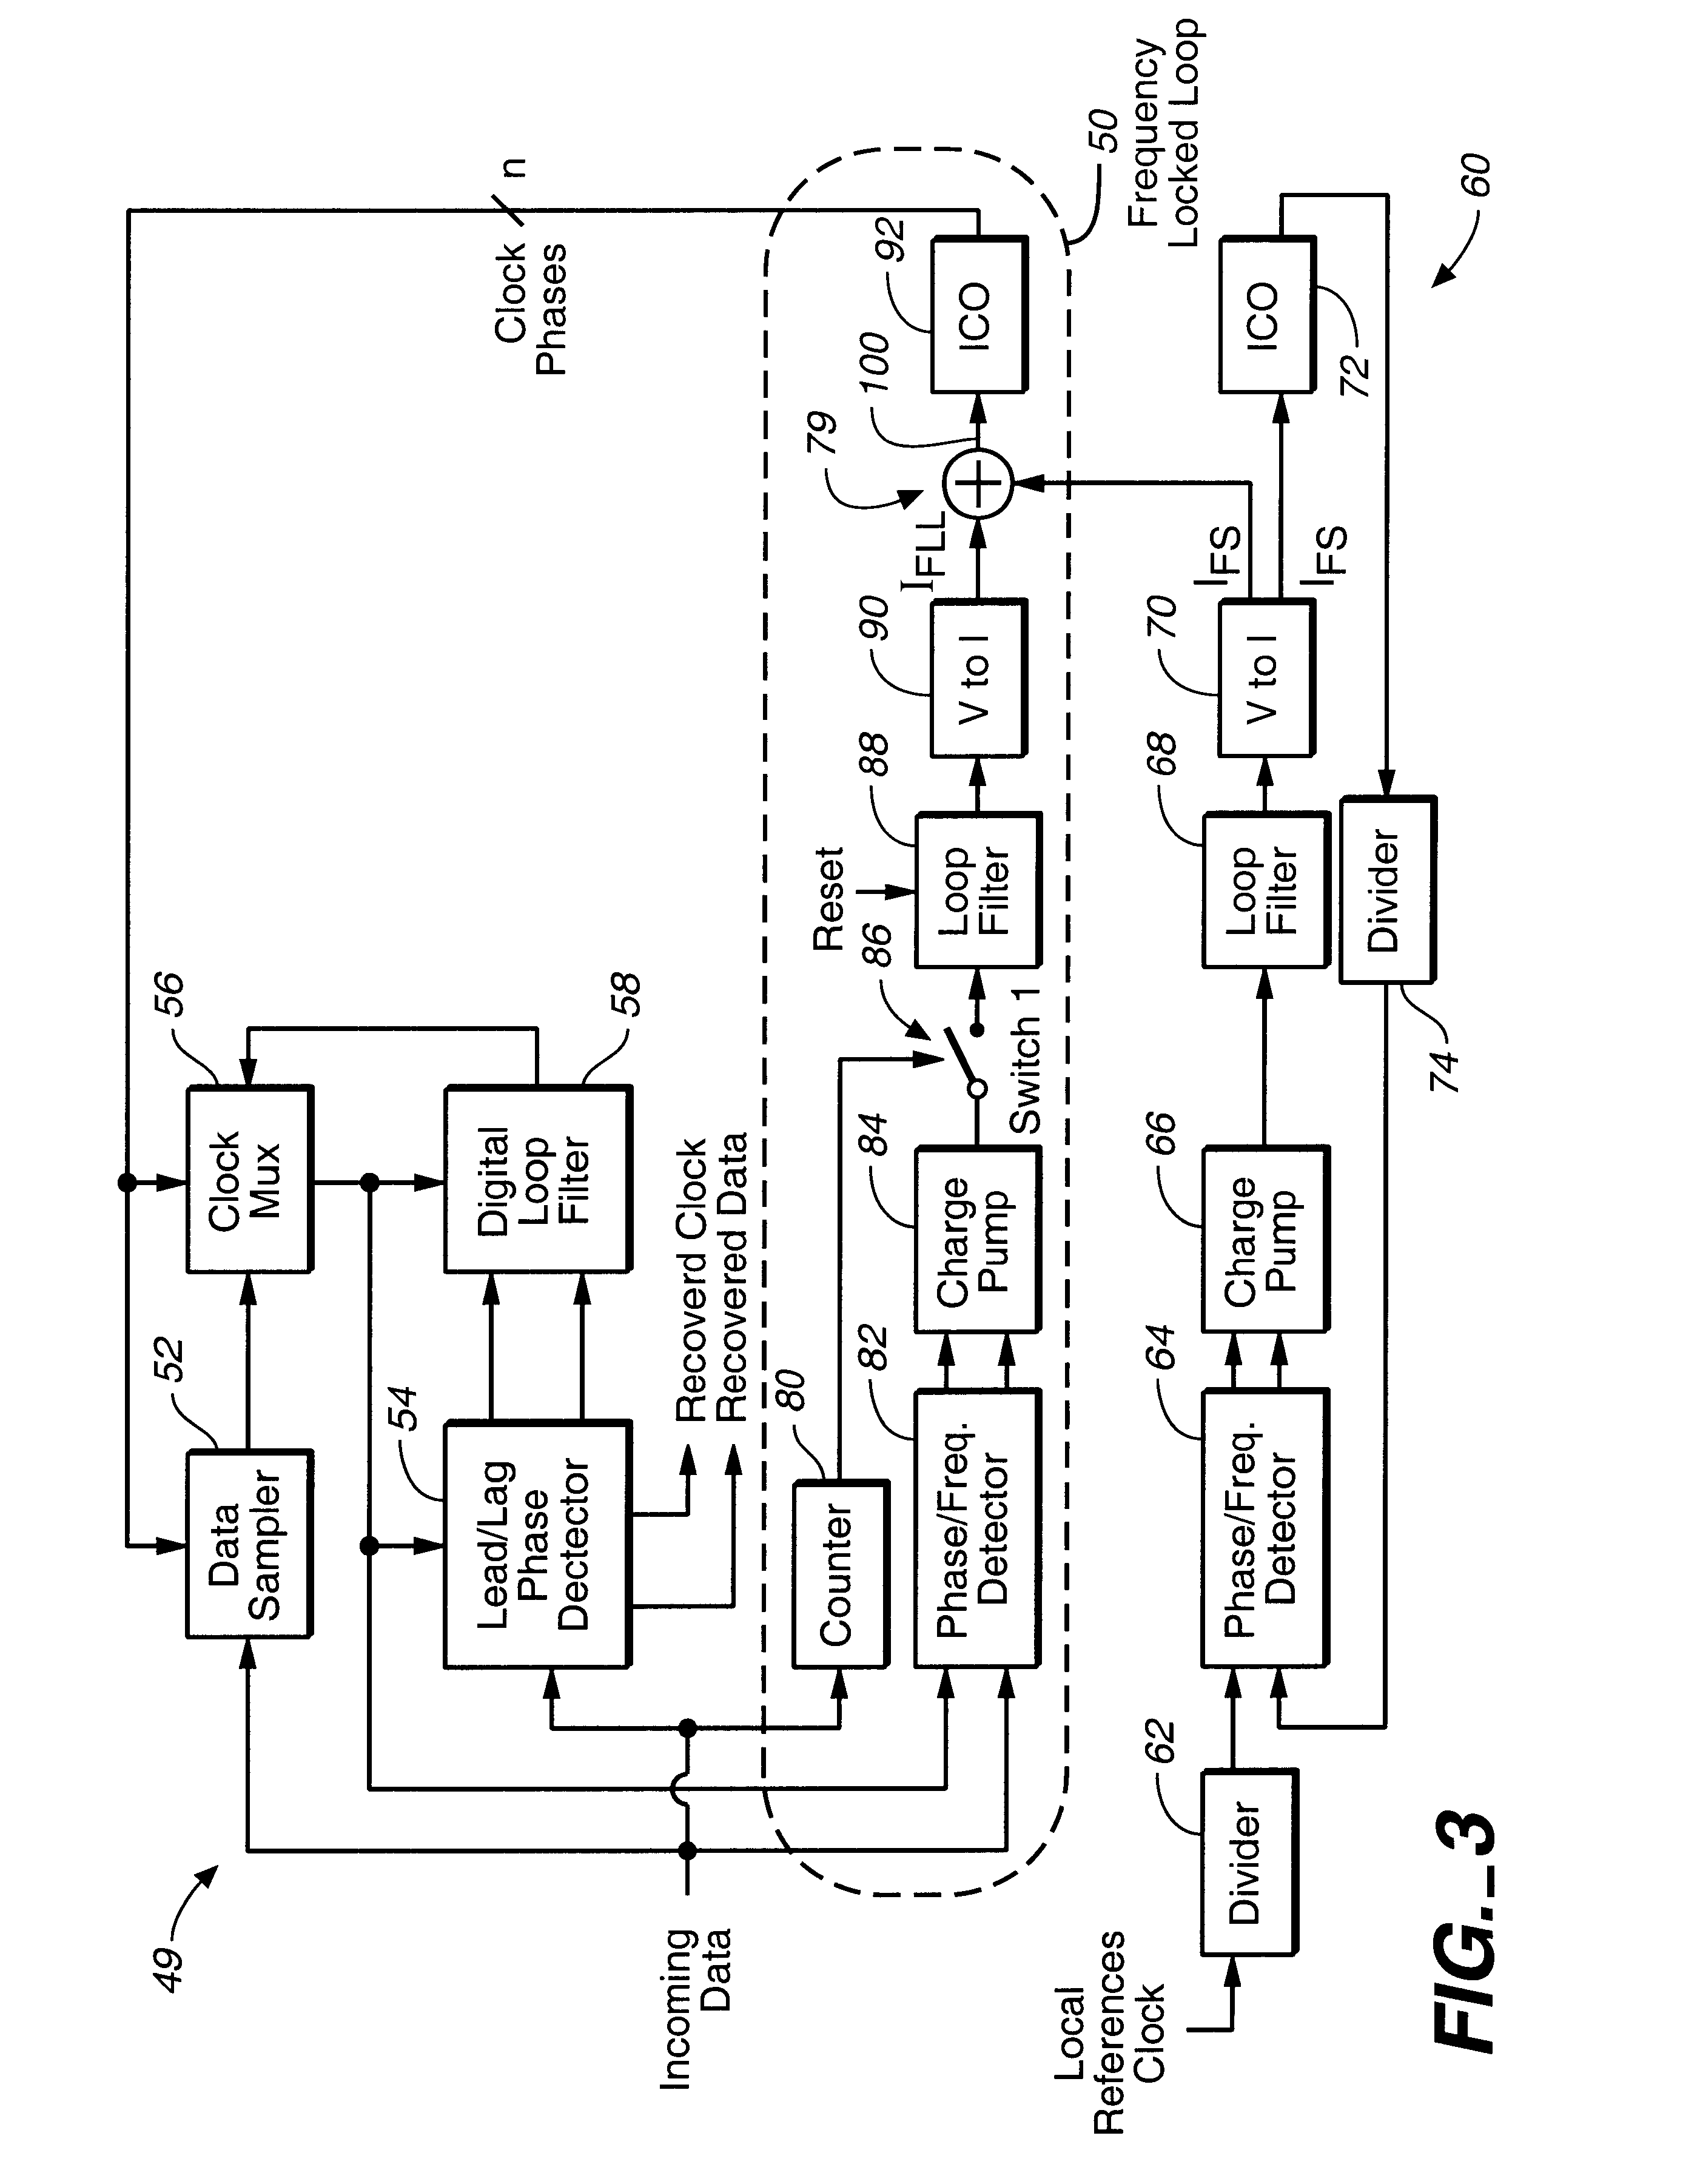 Modified first-order digital PLL with frequency locking capability